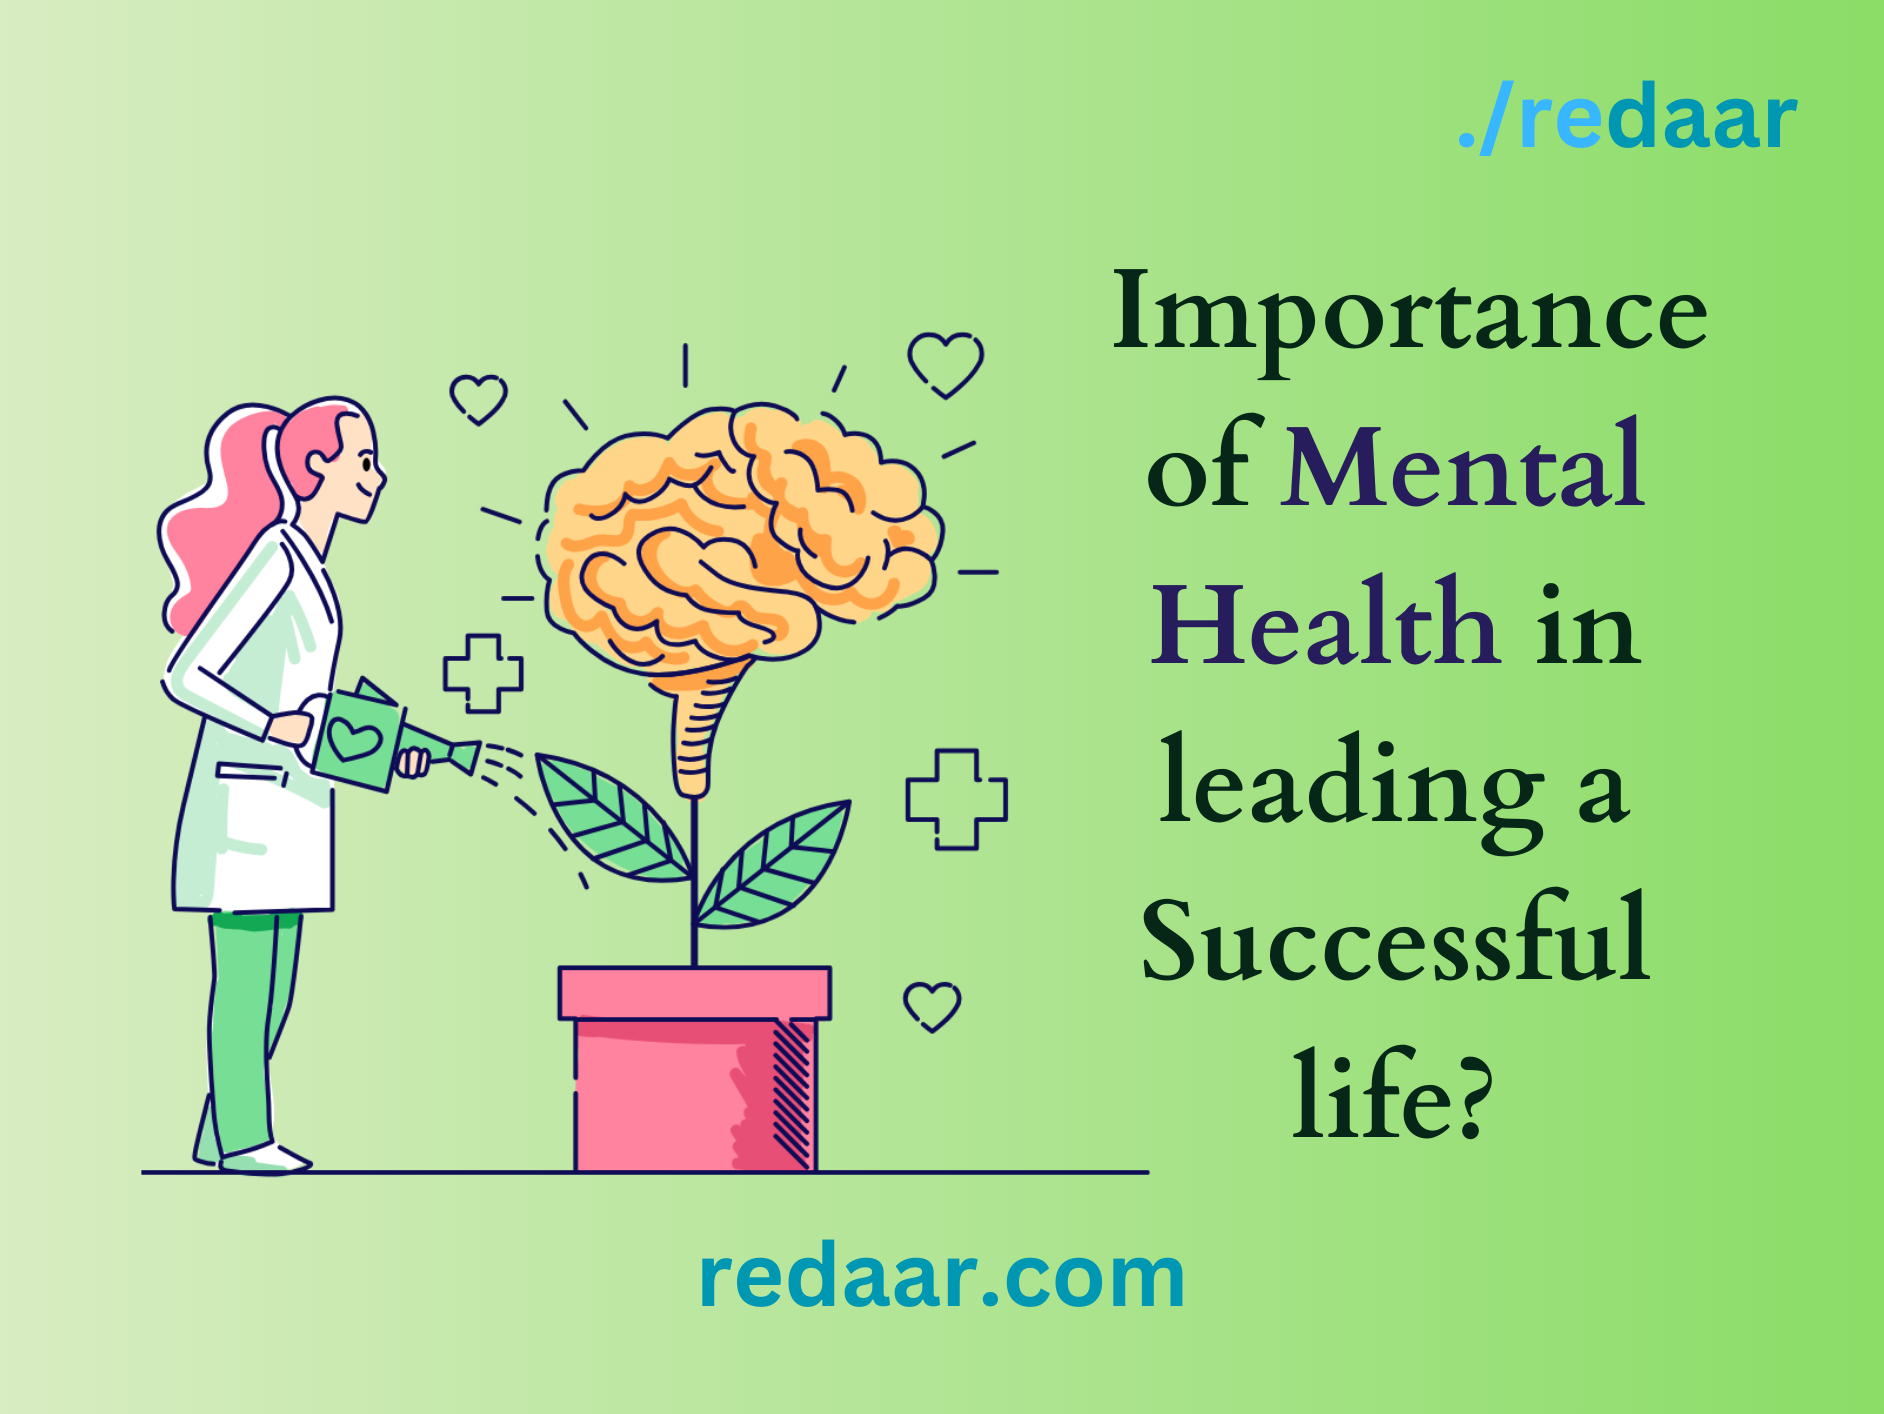 Importance of Mental Health in leading a successful life